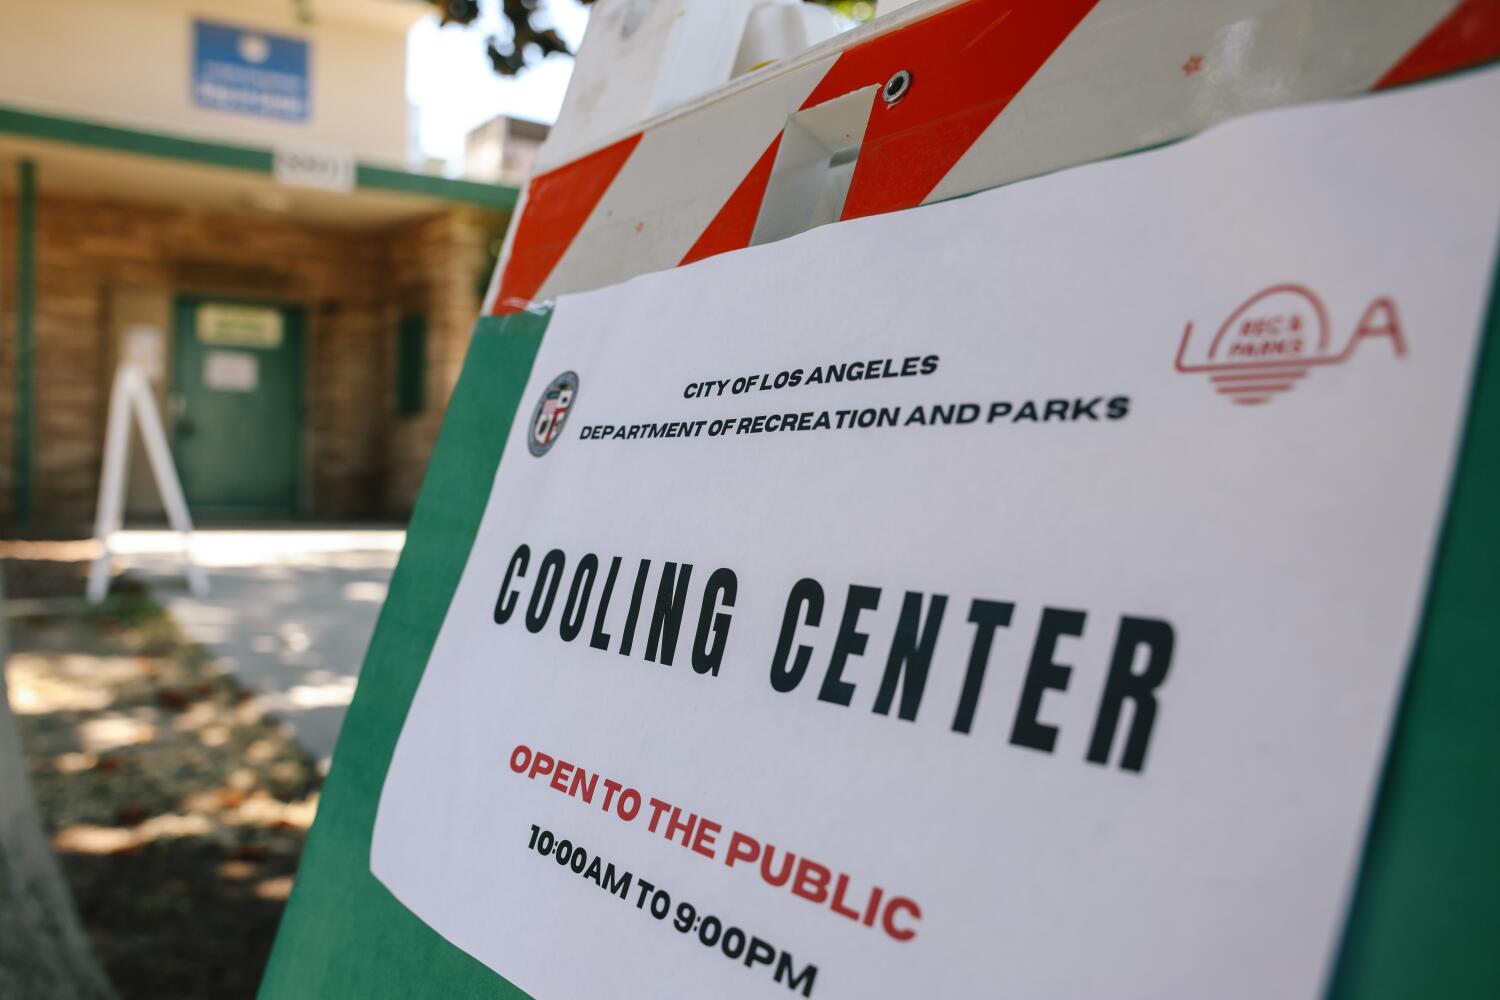 Find a cooling station near you to beat the heat during the scorching holiday weekend